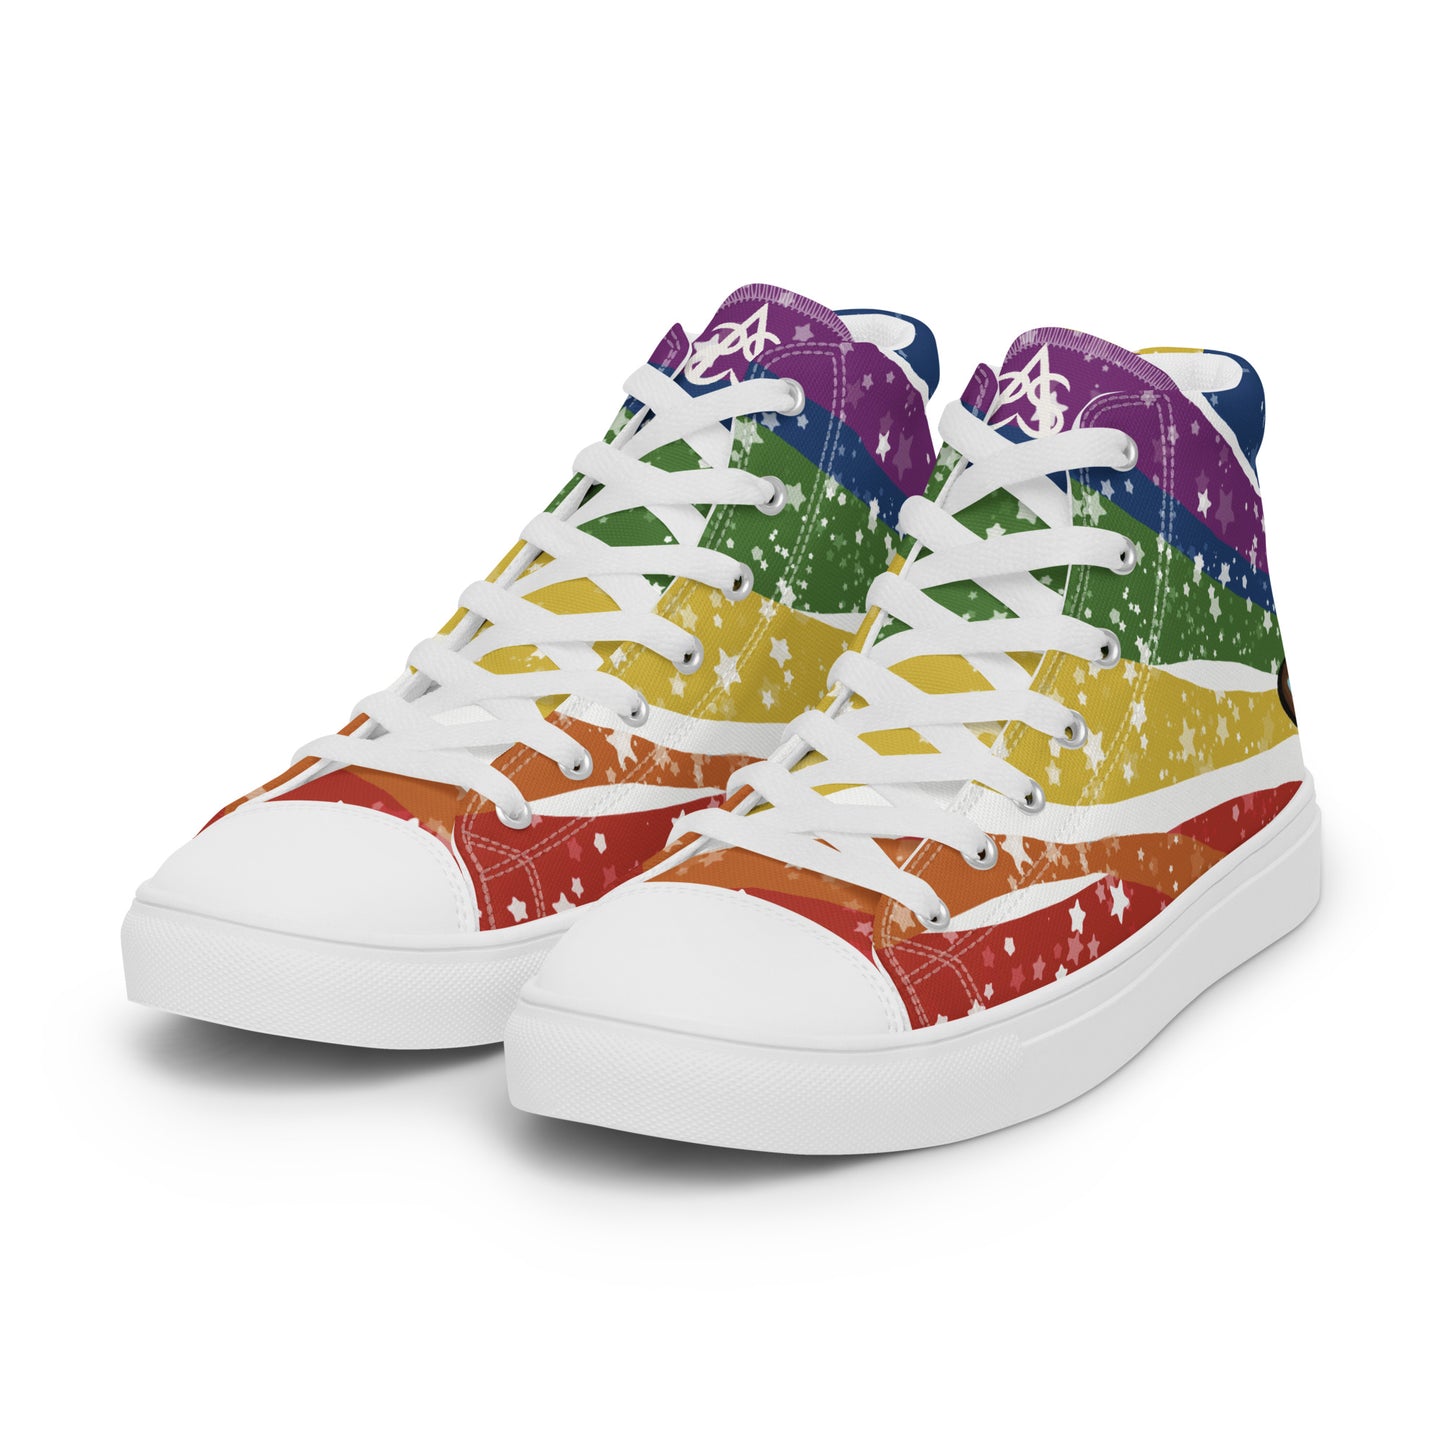 Left front view: A pair of high top shoes have wavy rainbow stripes coming from the heel and getting wider towards the laces, covered in stars, with a double heart in black and brown containing the Trans Pride flag near the heel.